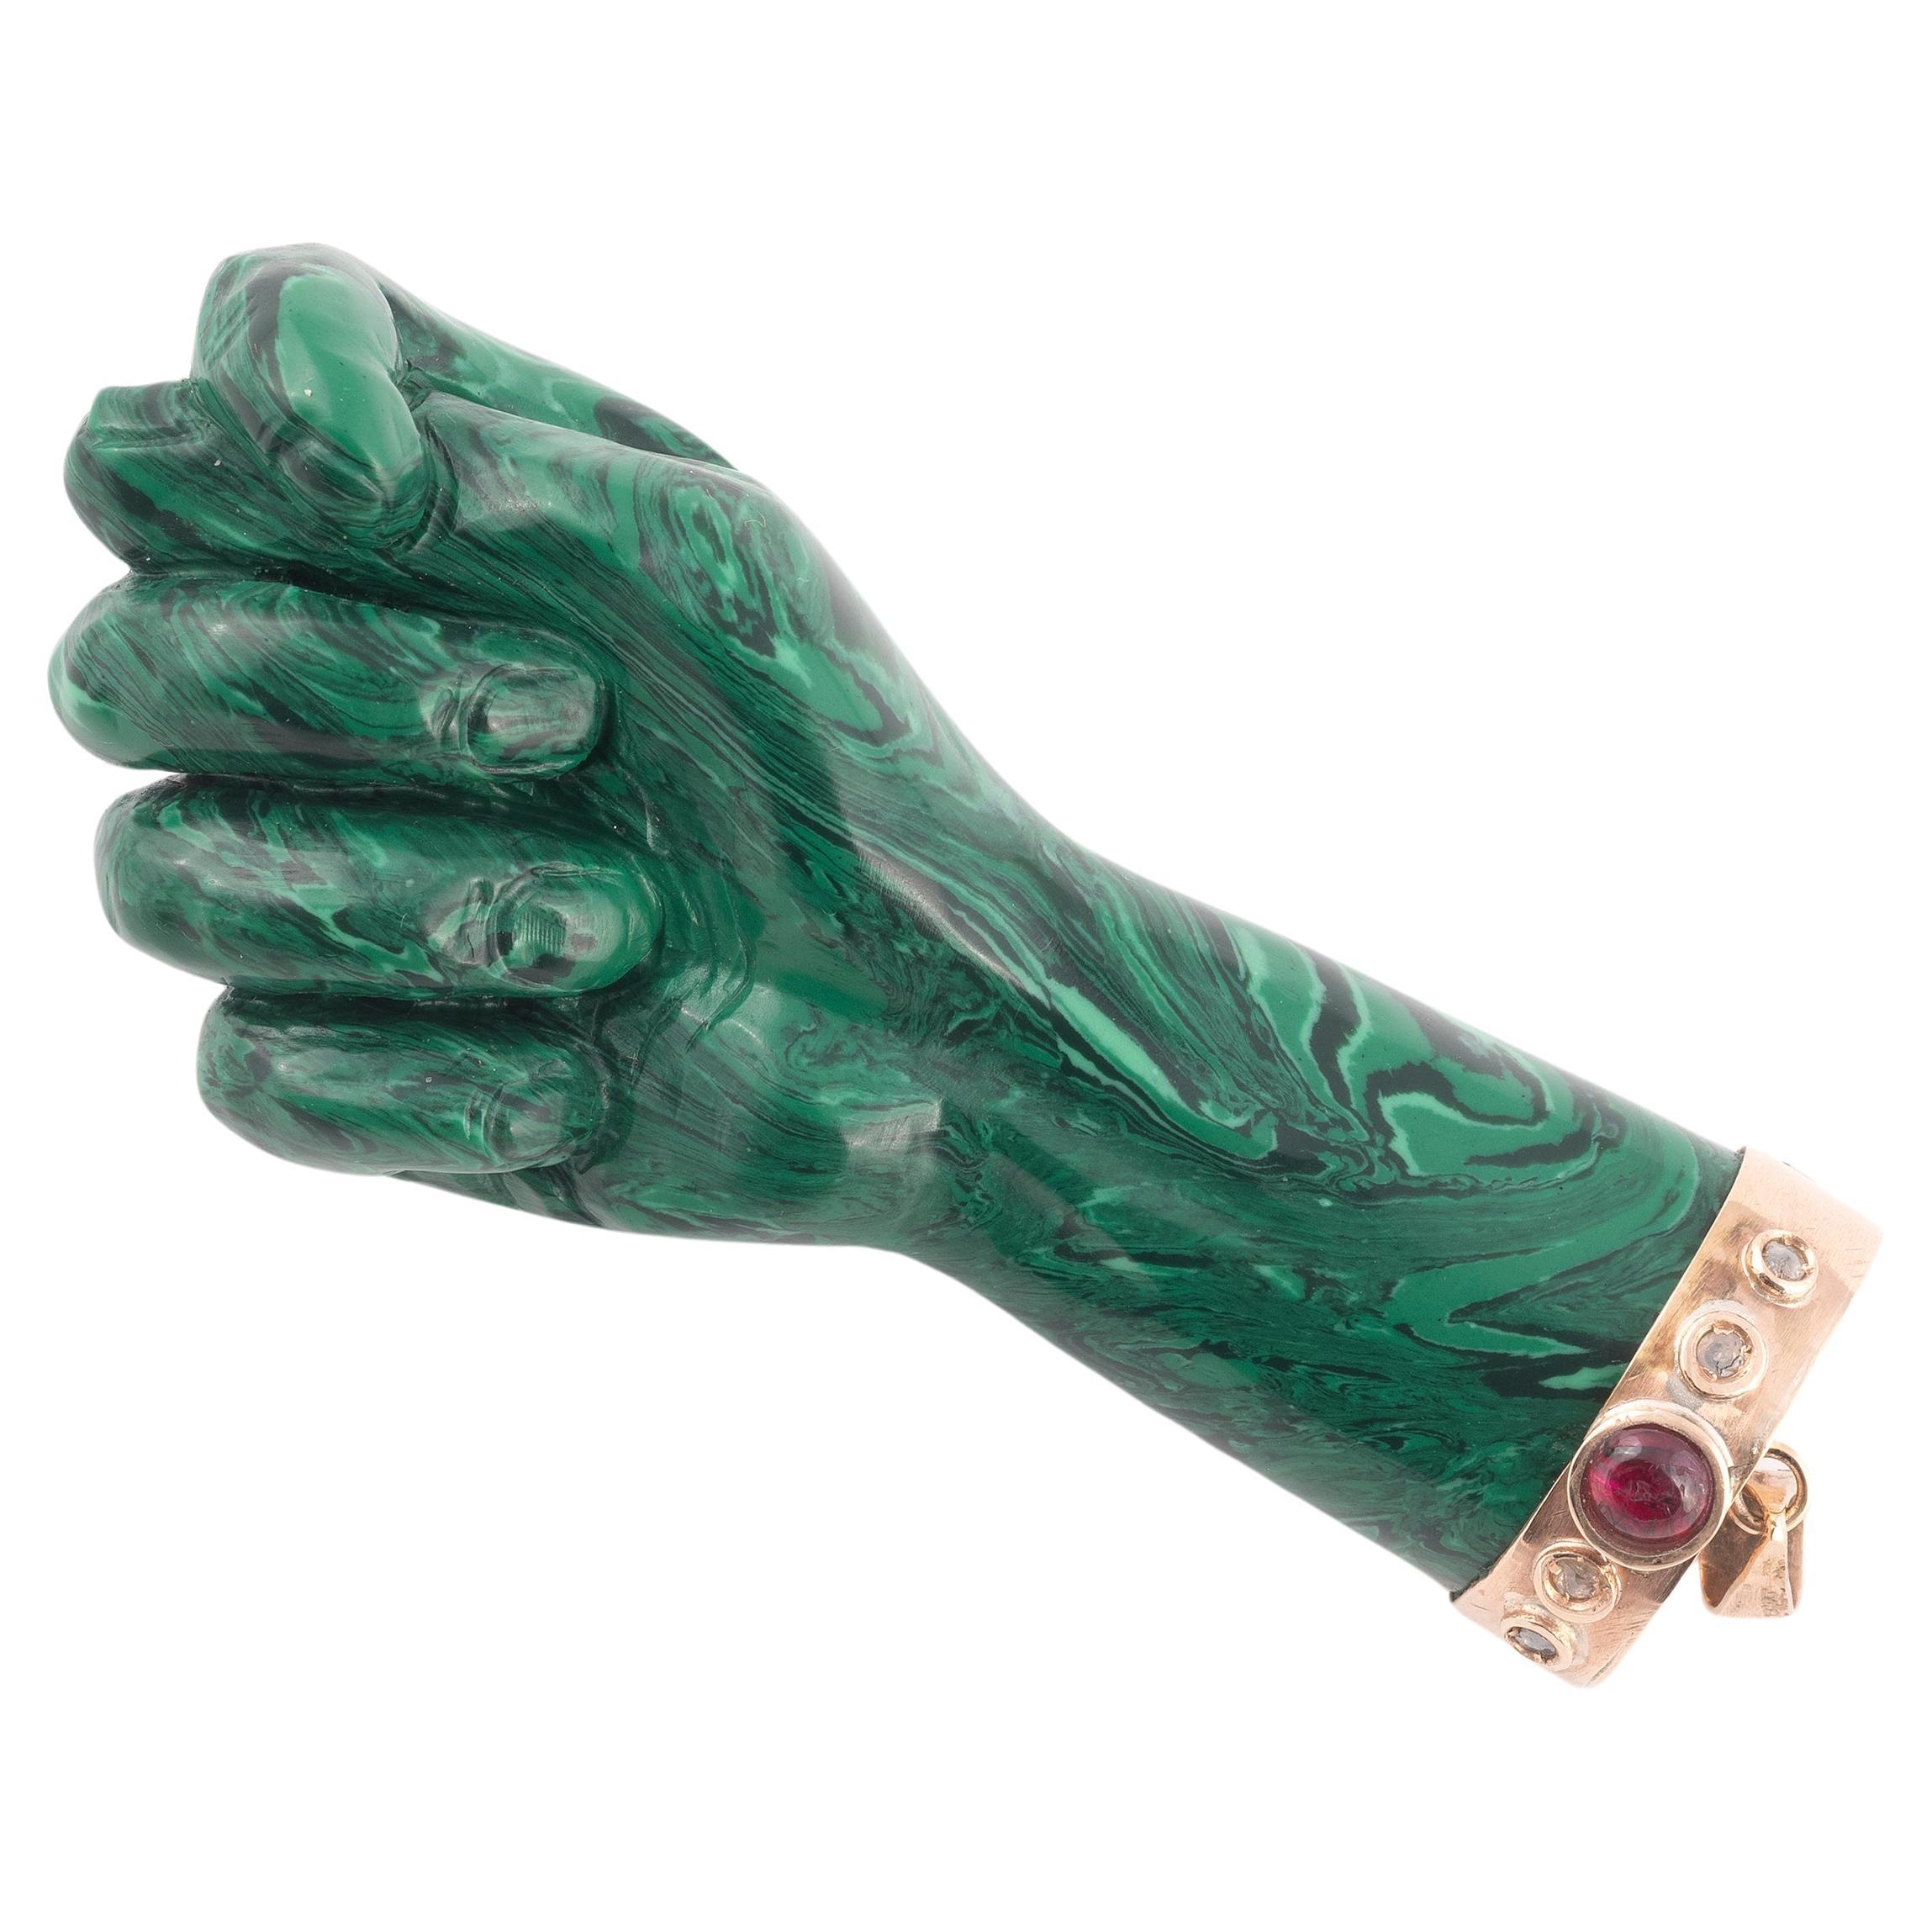 The malachite and realistically modelled with the thumb between the first two fingers surmounted by a gold cap embellished with cabochon cut semi-precious stones, length 80mm including loop.
Weight: 41gr.
A higa jewel (sometimes known as a figa)